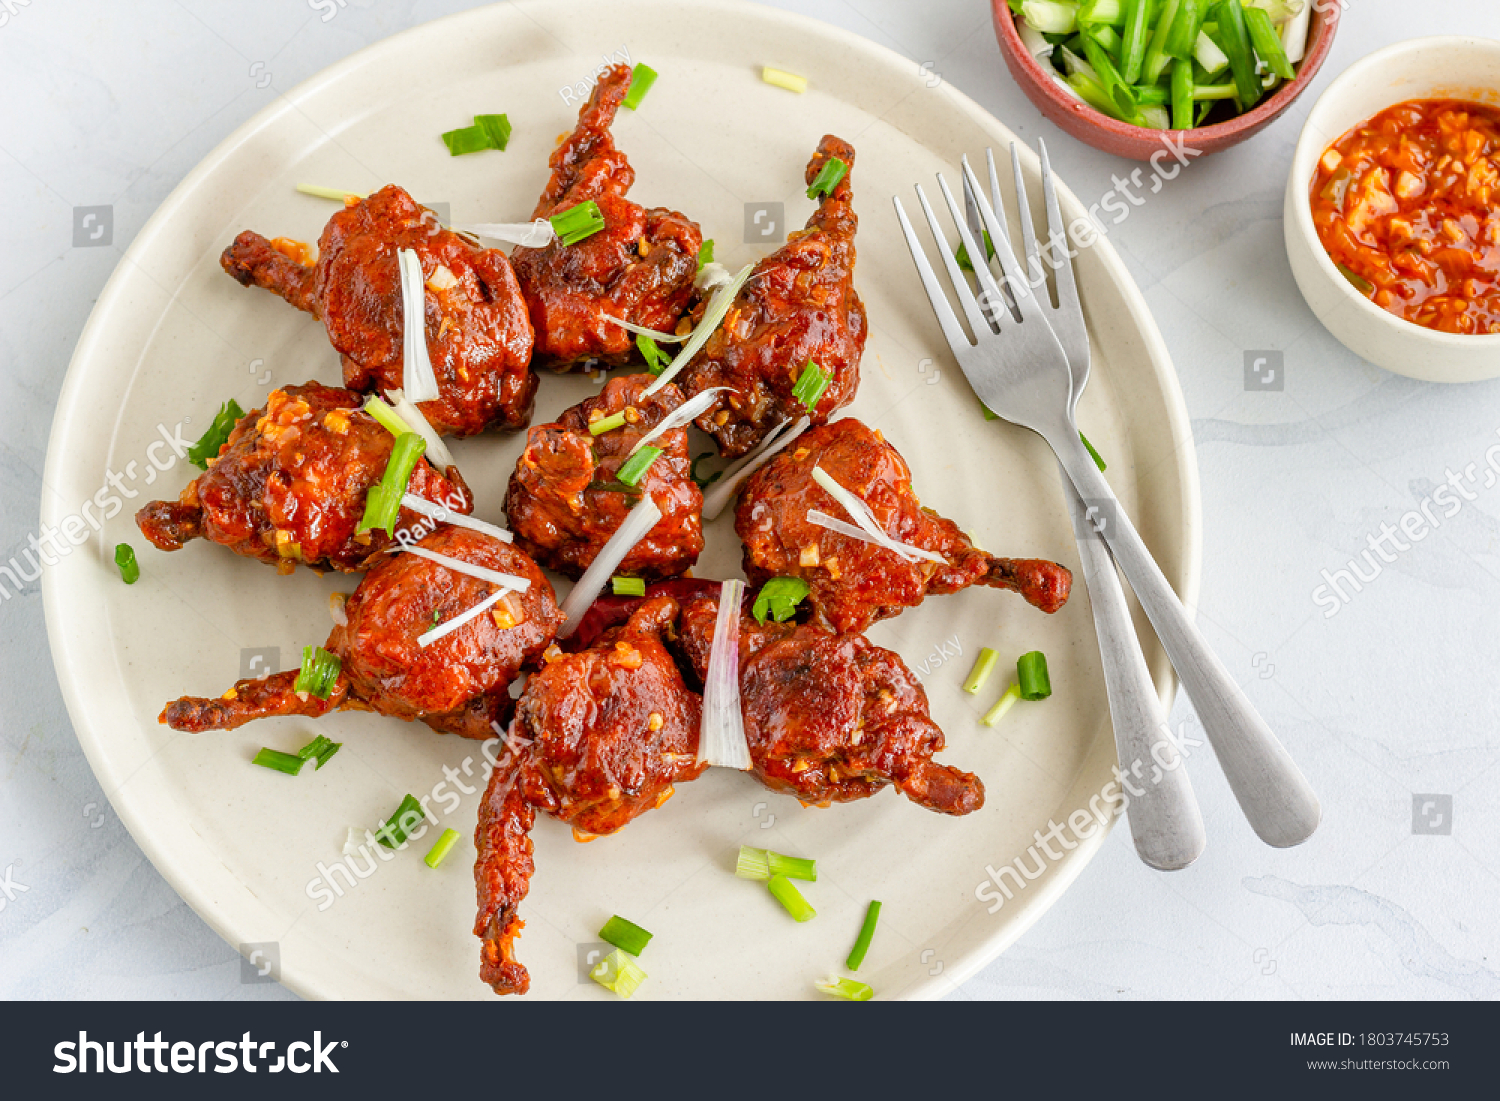 Popular Indo-Chinese Chicken Appetizer Made of Chicken Winglets on a White Plate on White Background Garnished with Scallion and Red Chili Pepper Horizontal Top View Photo #1803745753